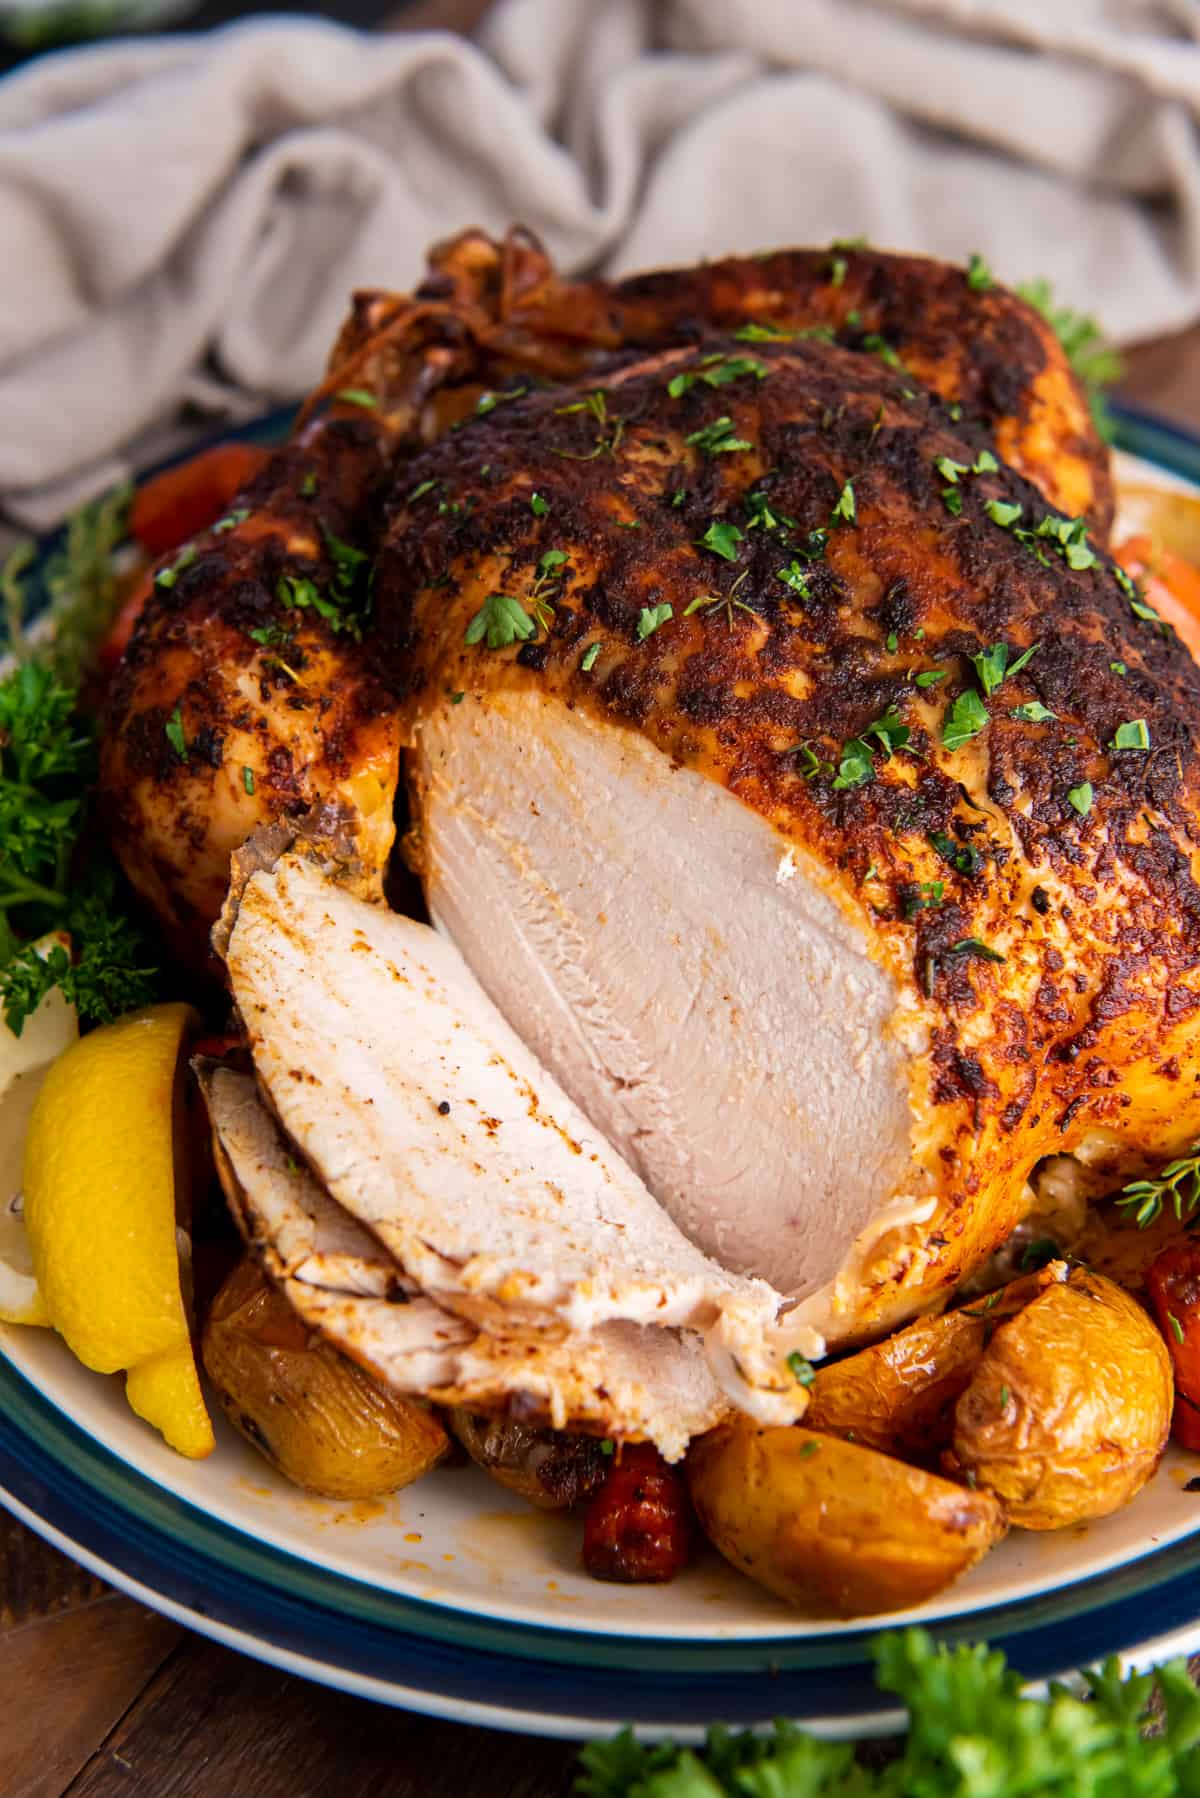 A crispy roast chicken with part of the breast meat sliced.